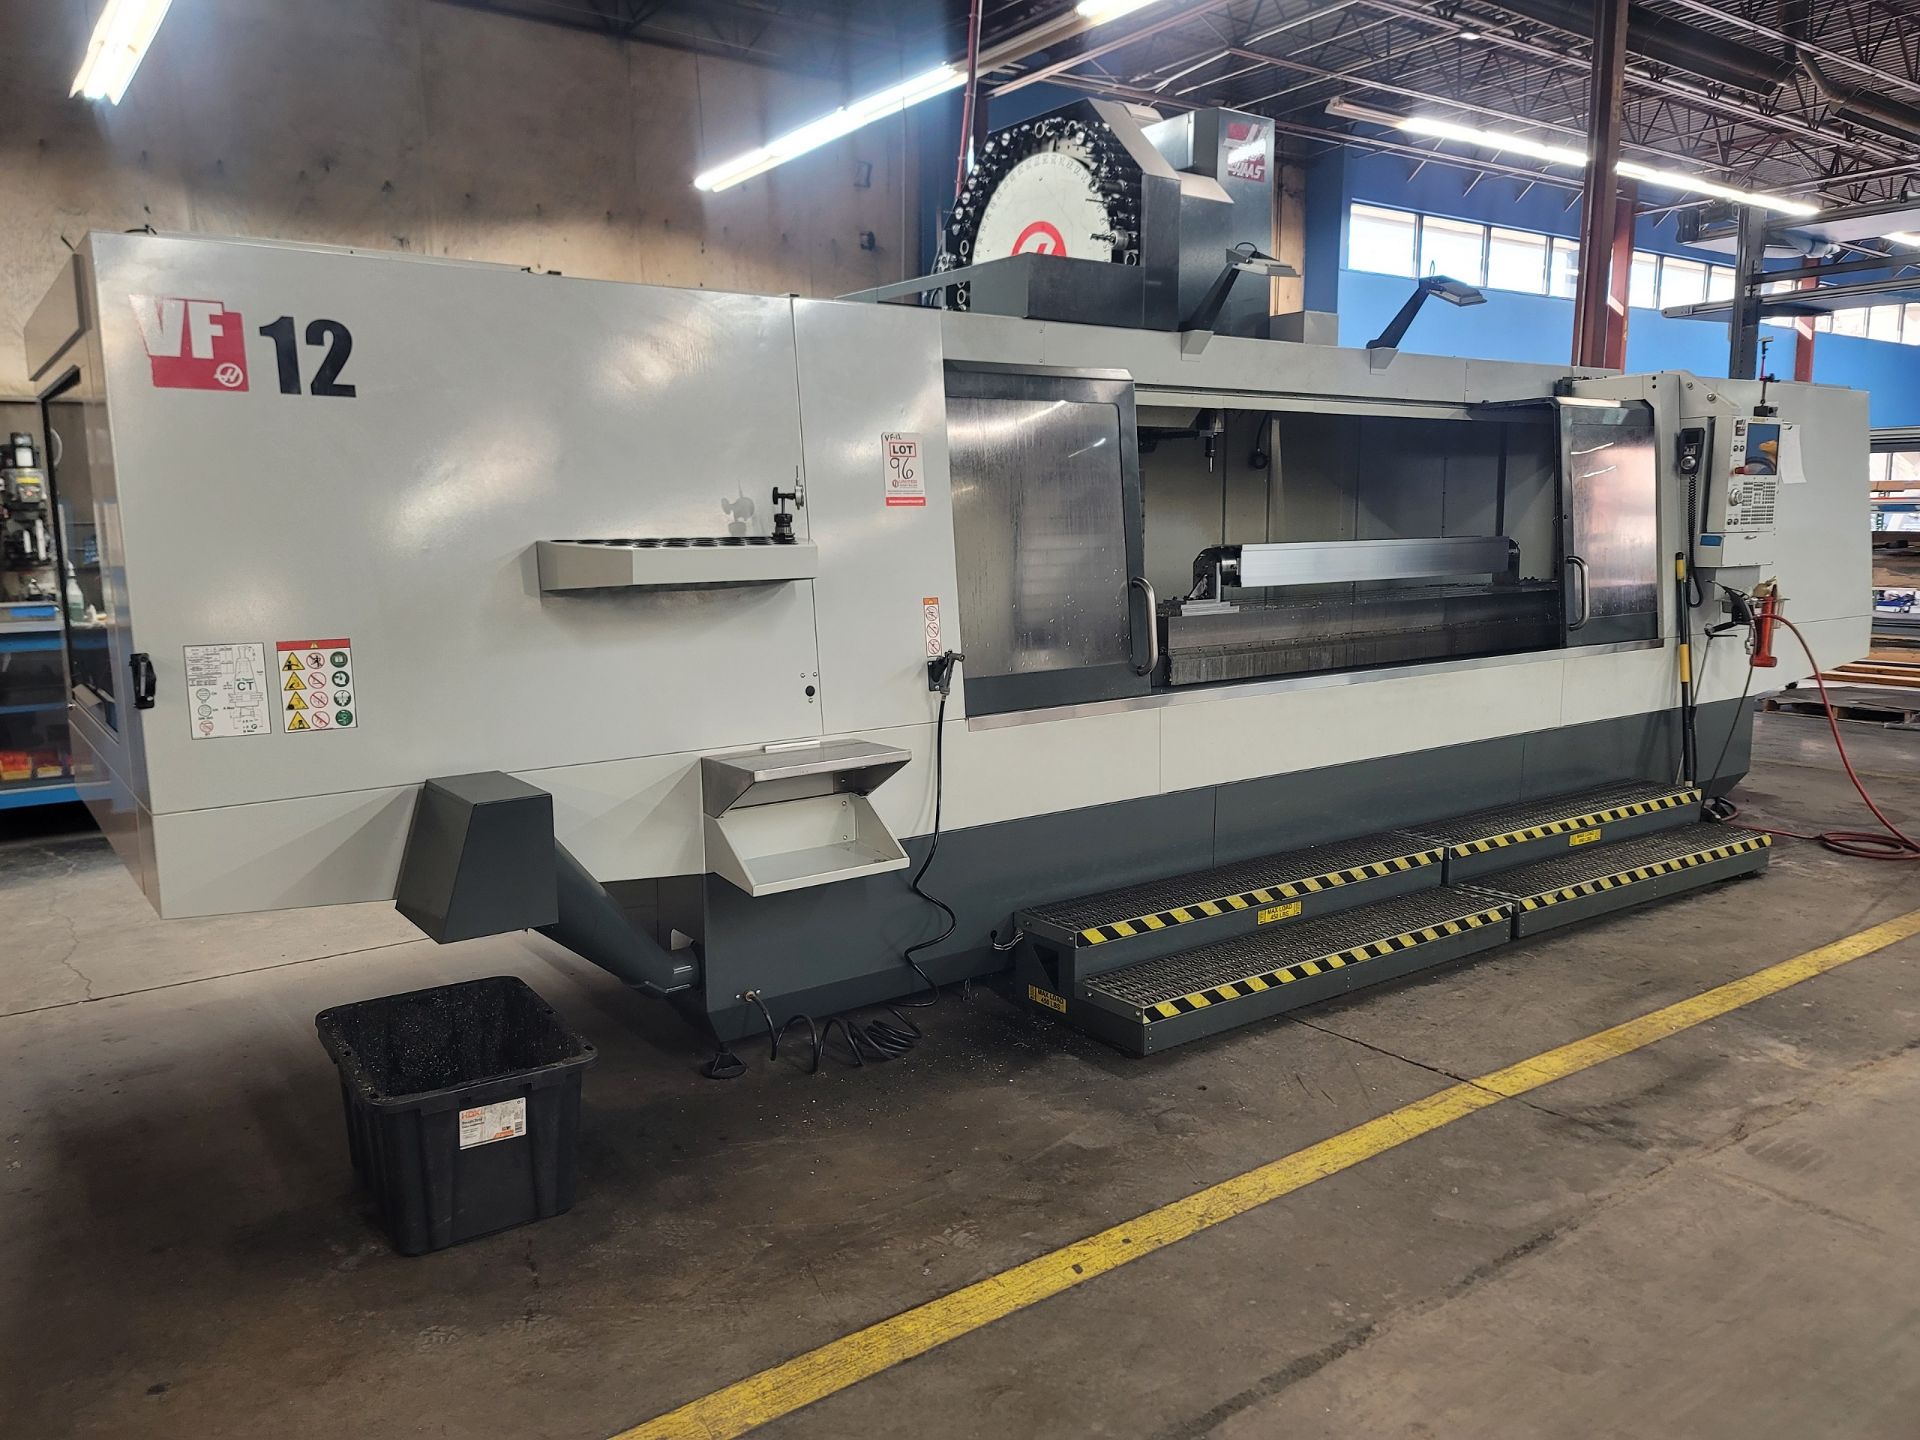 2021 HAAS VF-12/40 VERTICAL MACHINING CENTER, XYZ TRAVELS: 150" X 32" X 30", 150" X 28" TABLE, - Image 3 of 27